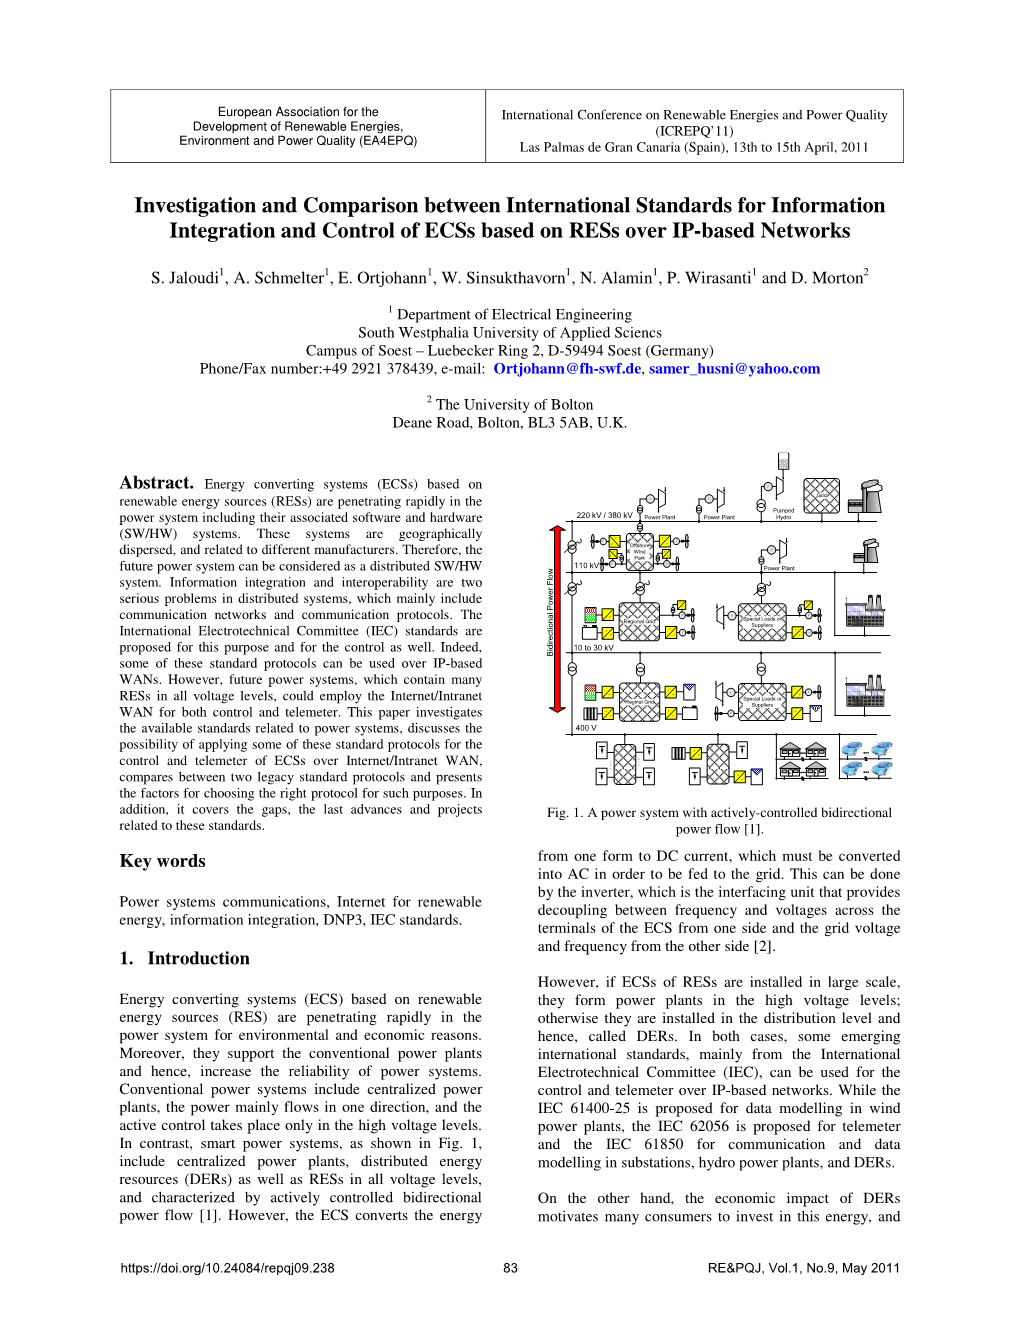 Investigation and Comparison Between International Standards for Information Integration and Control of Ecss Based on Ress Over IP-Based Networks